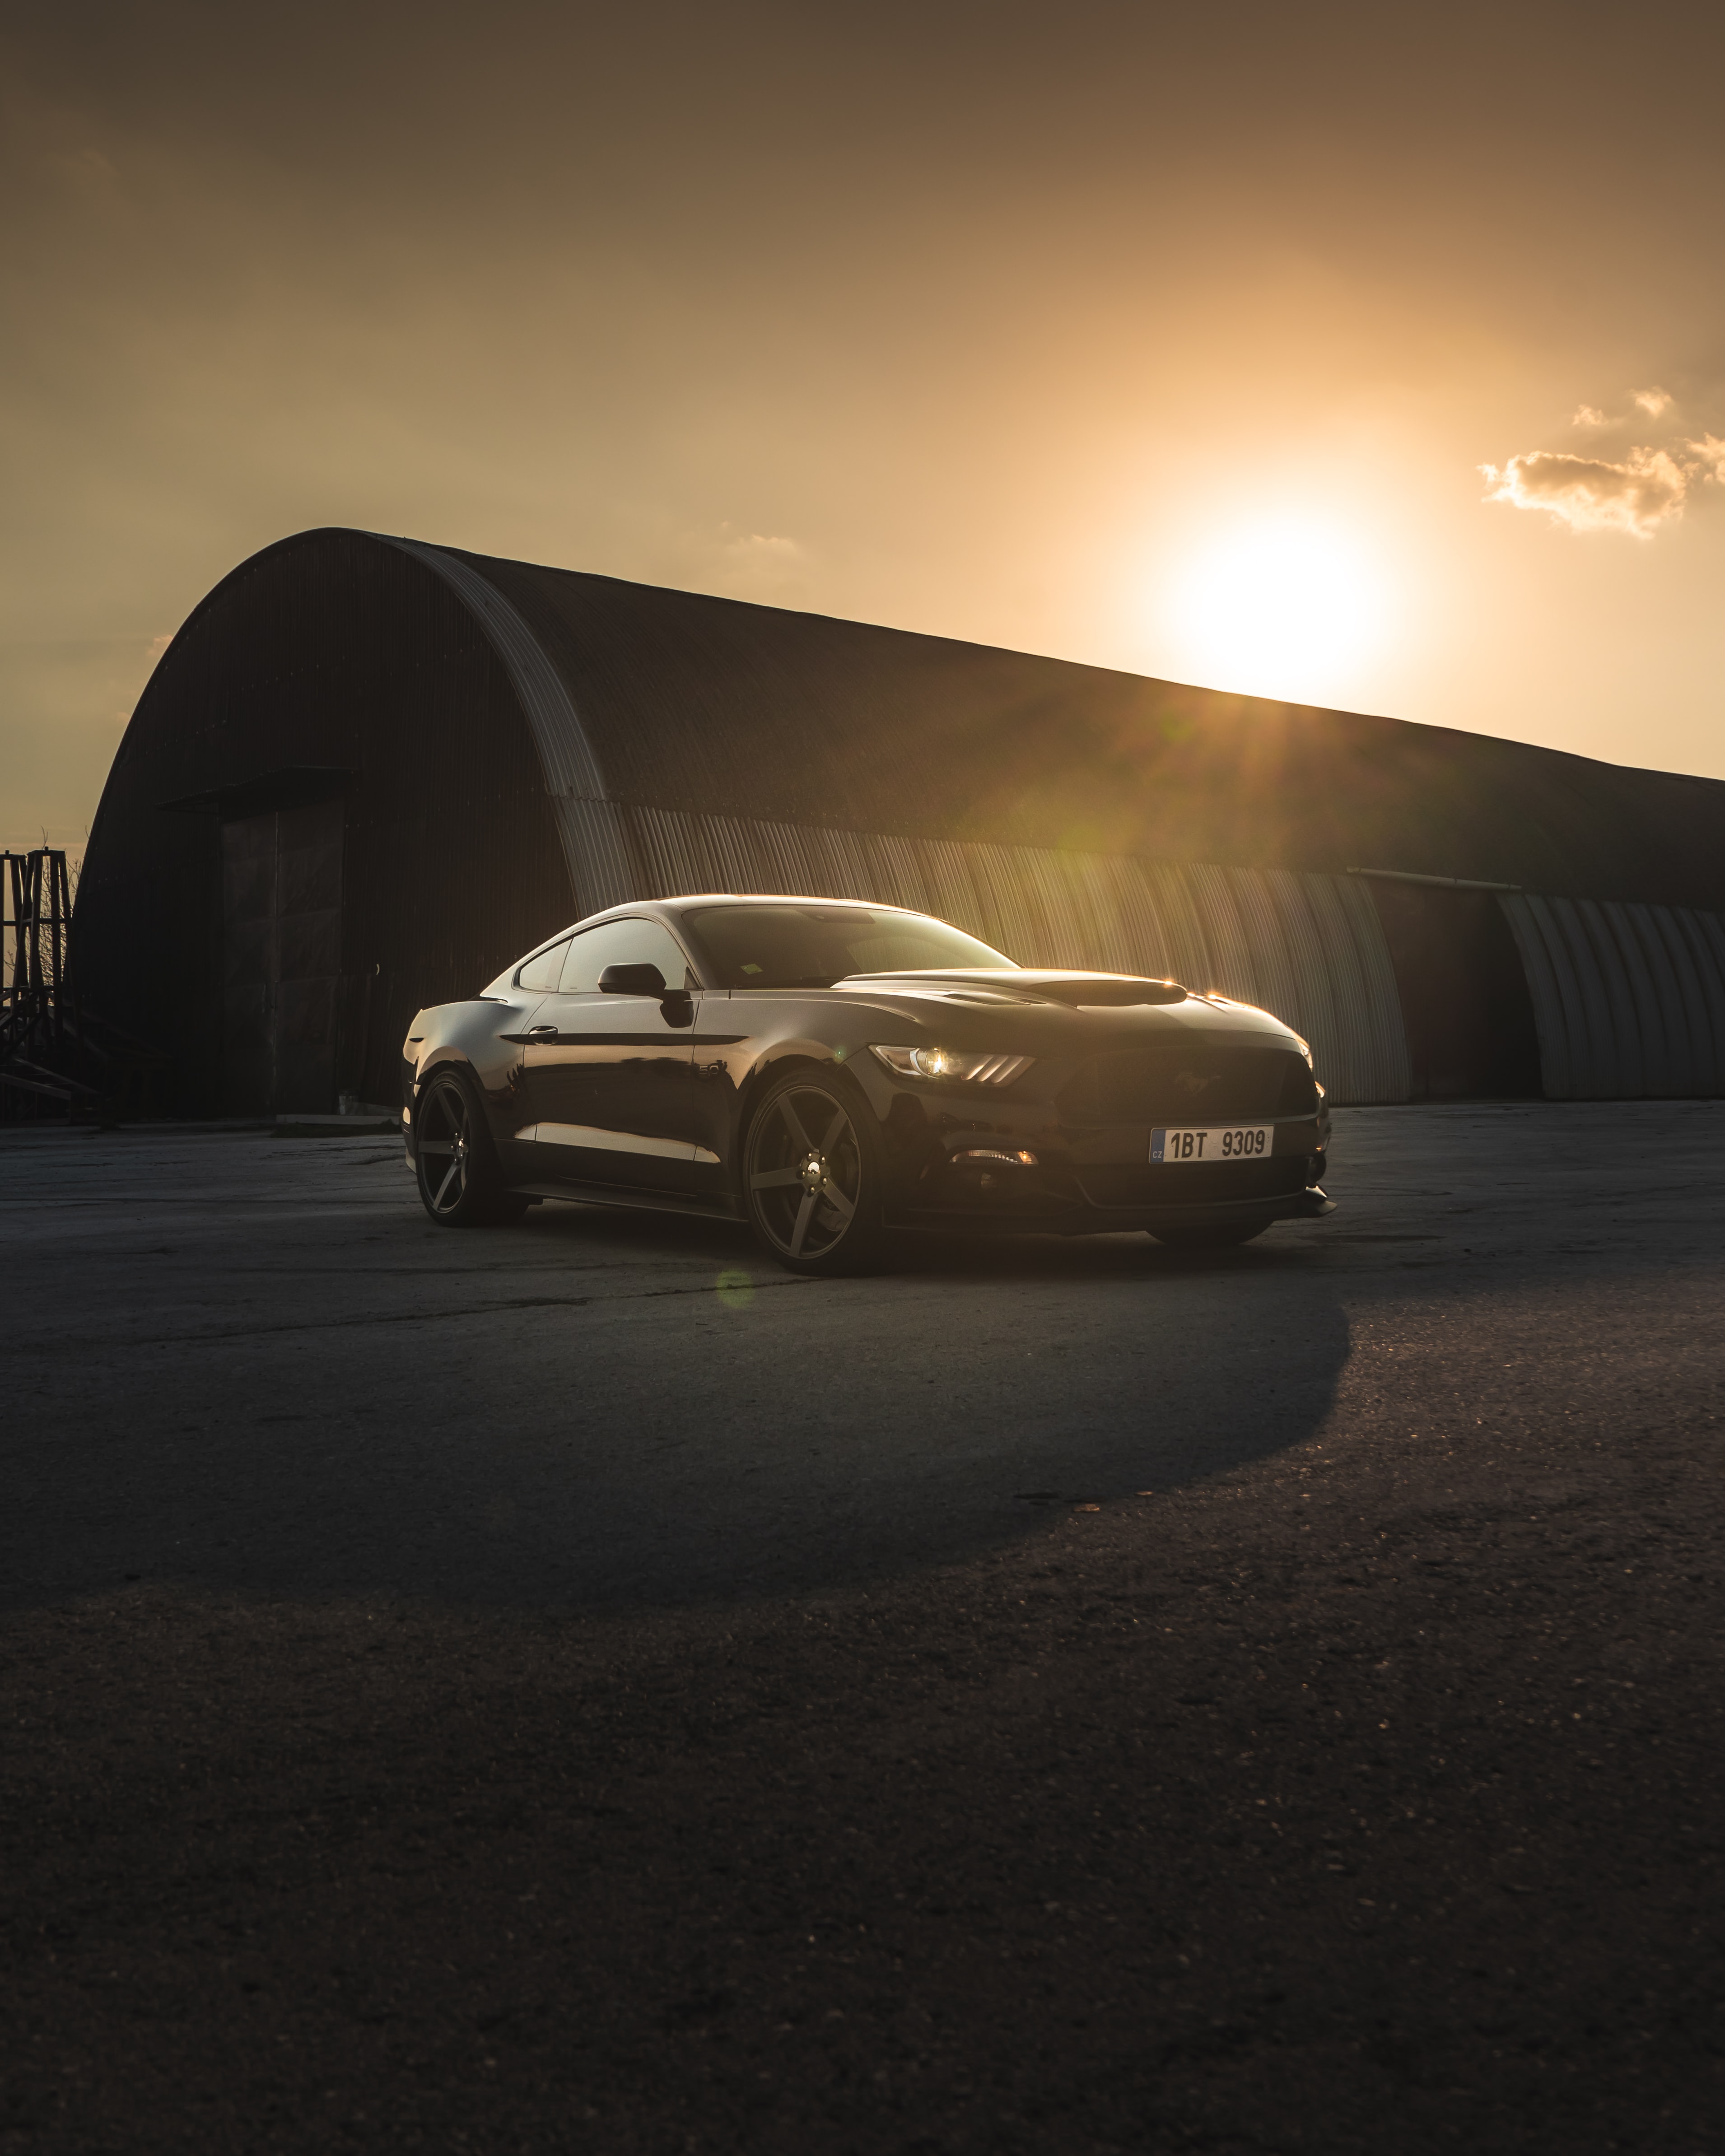 ford mustang, sports, black, cars, sunset, mustang, car, sports car, side view